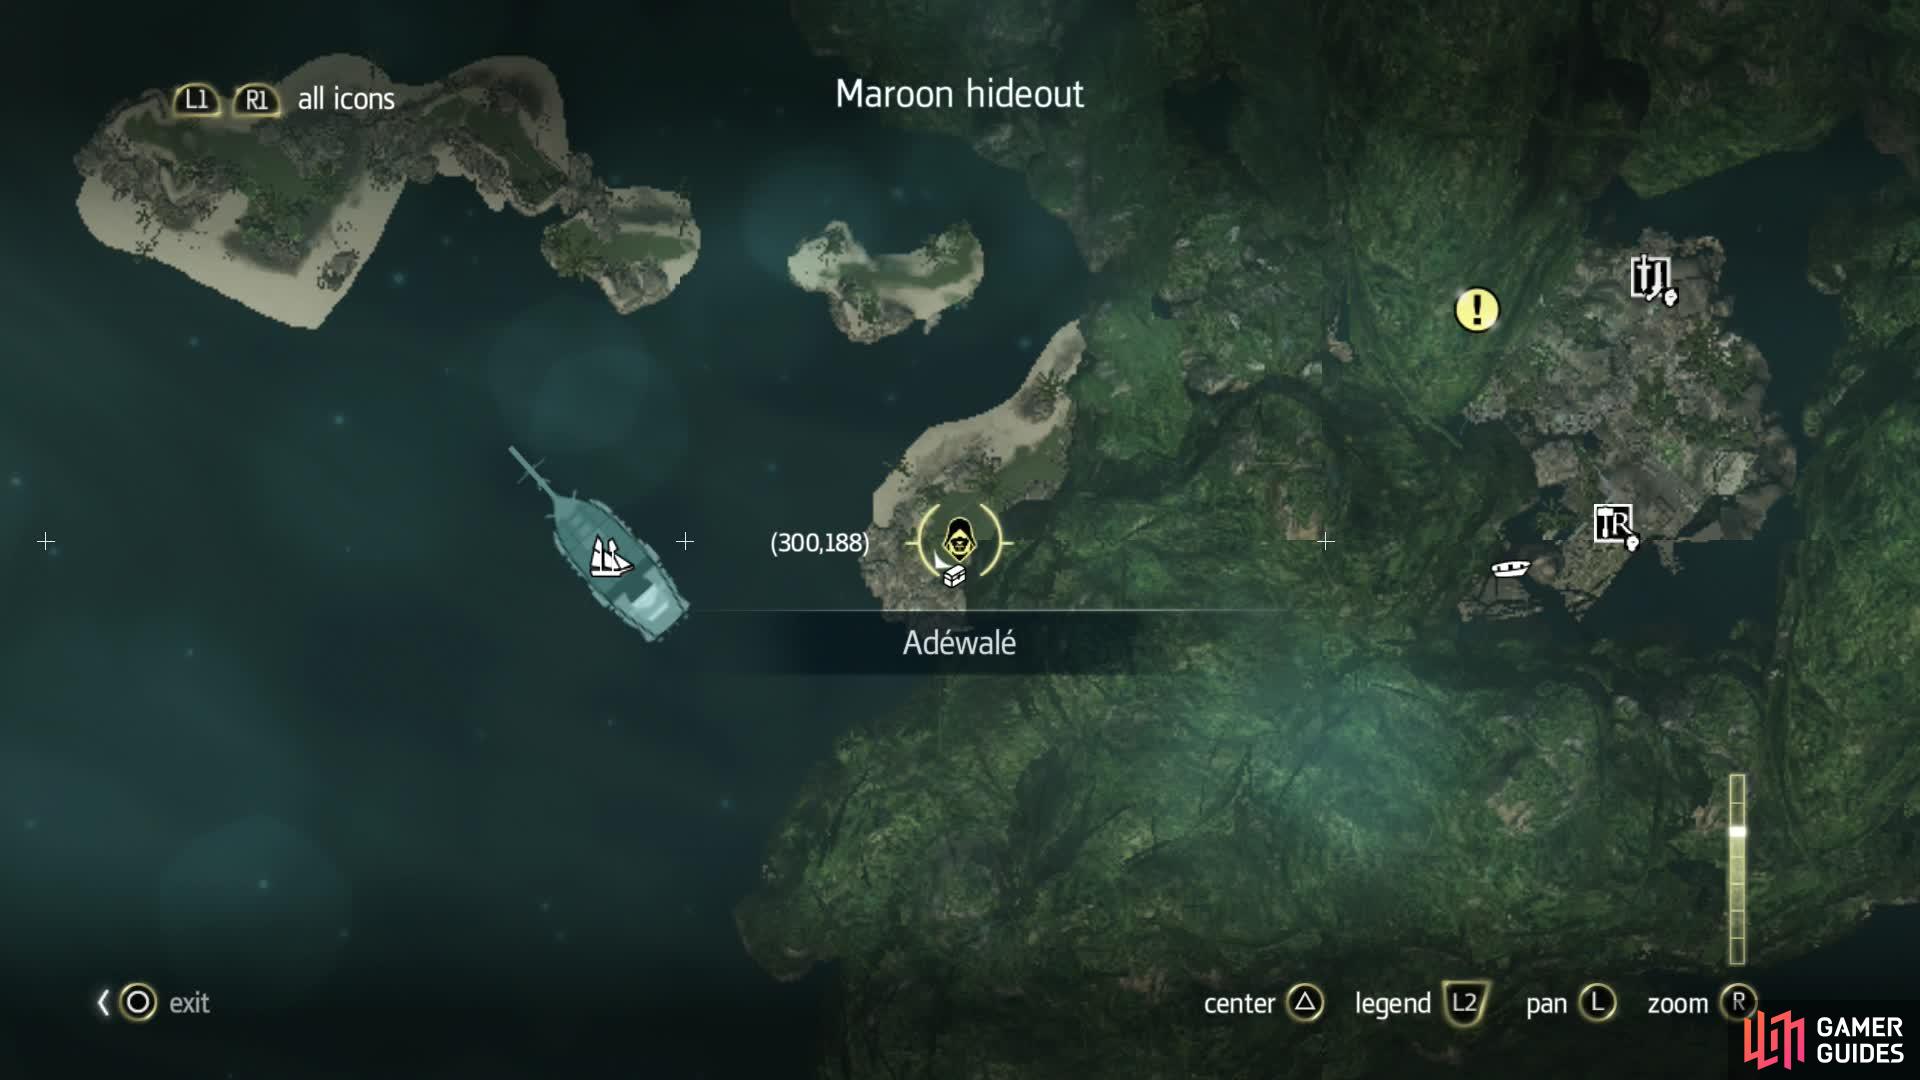 Maroon Hideout Chest Location. It is found outside of the hideout on a cliff edge.